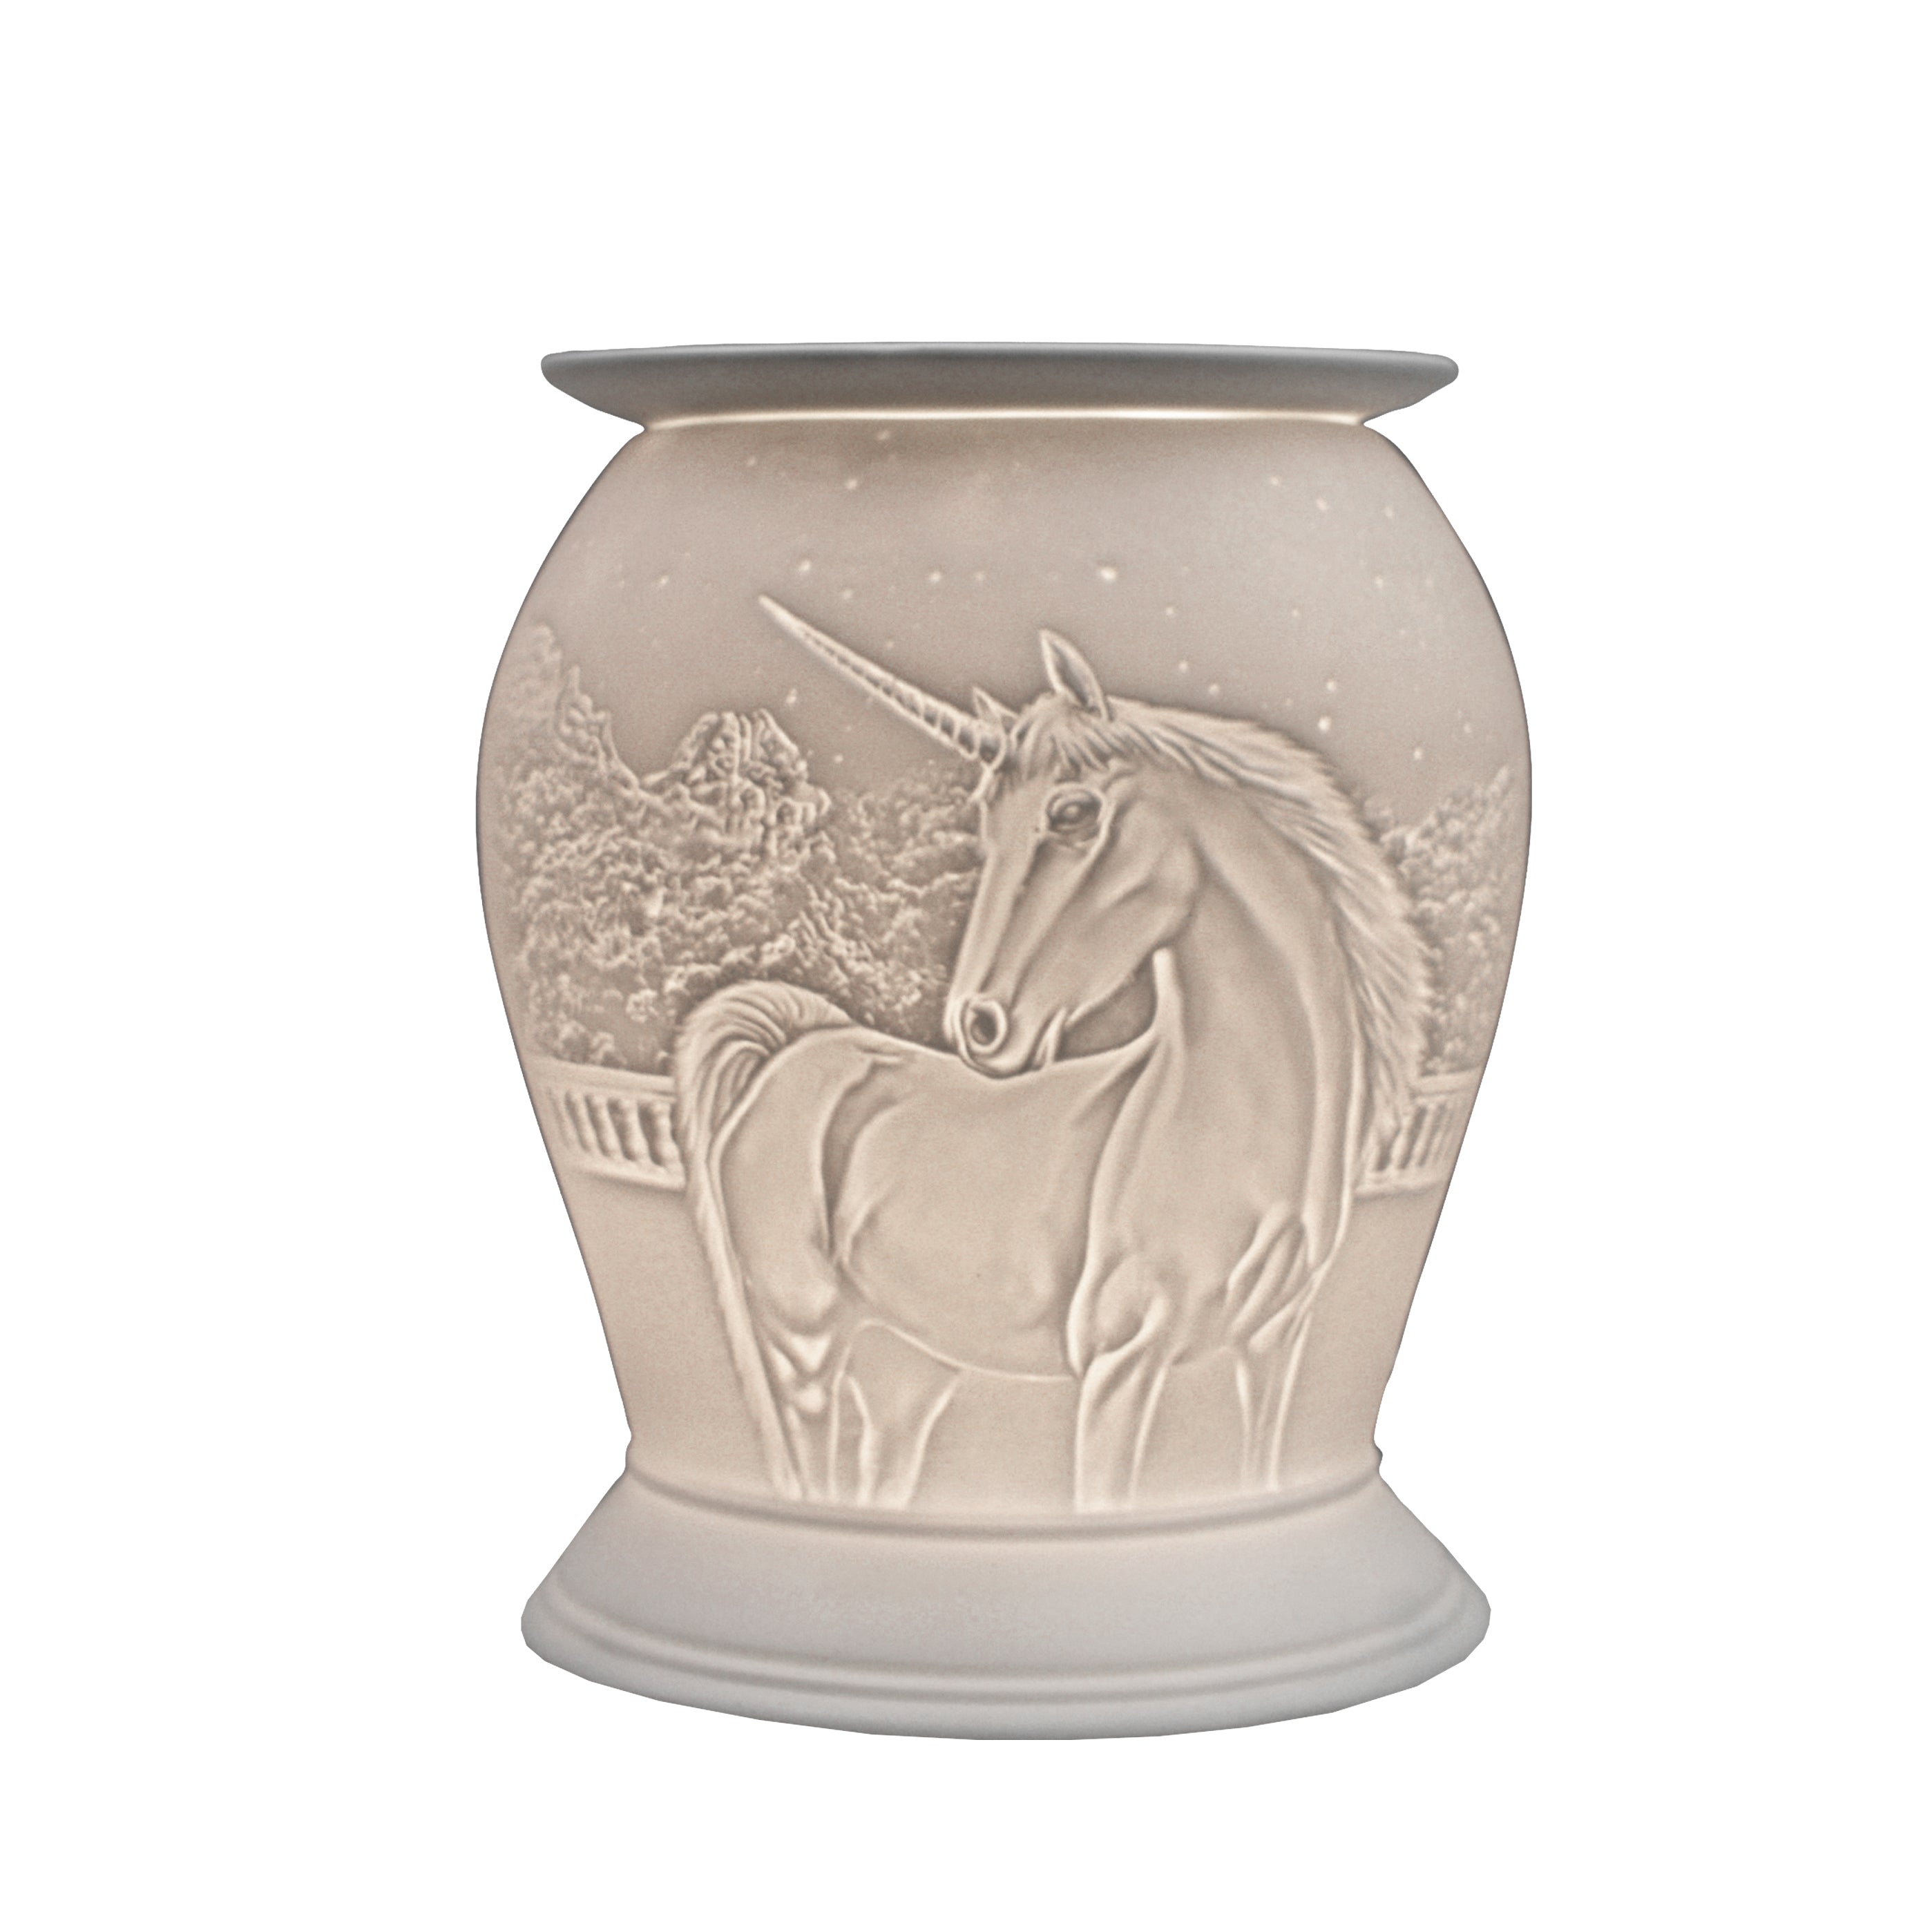 The porcelain material on this Wax Melt Burner allows bright light to shine through it, providing the opportunity to create this magical Unicorn design. This is done by crafting images out of thicker and thinner sections of the porcelain, allowing for detailed shadowing and a 3D effect. The porcelains elegant look will fit perfectly in any room is available in a range of designs and two different shapes.